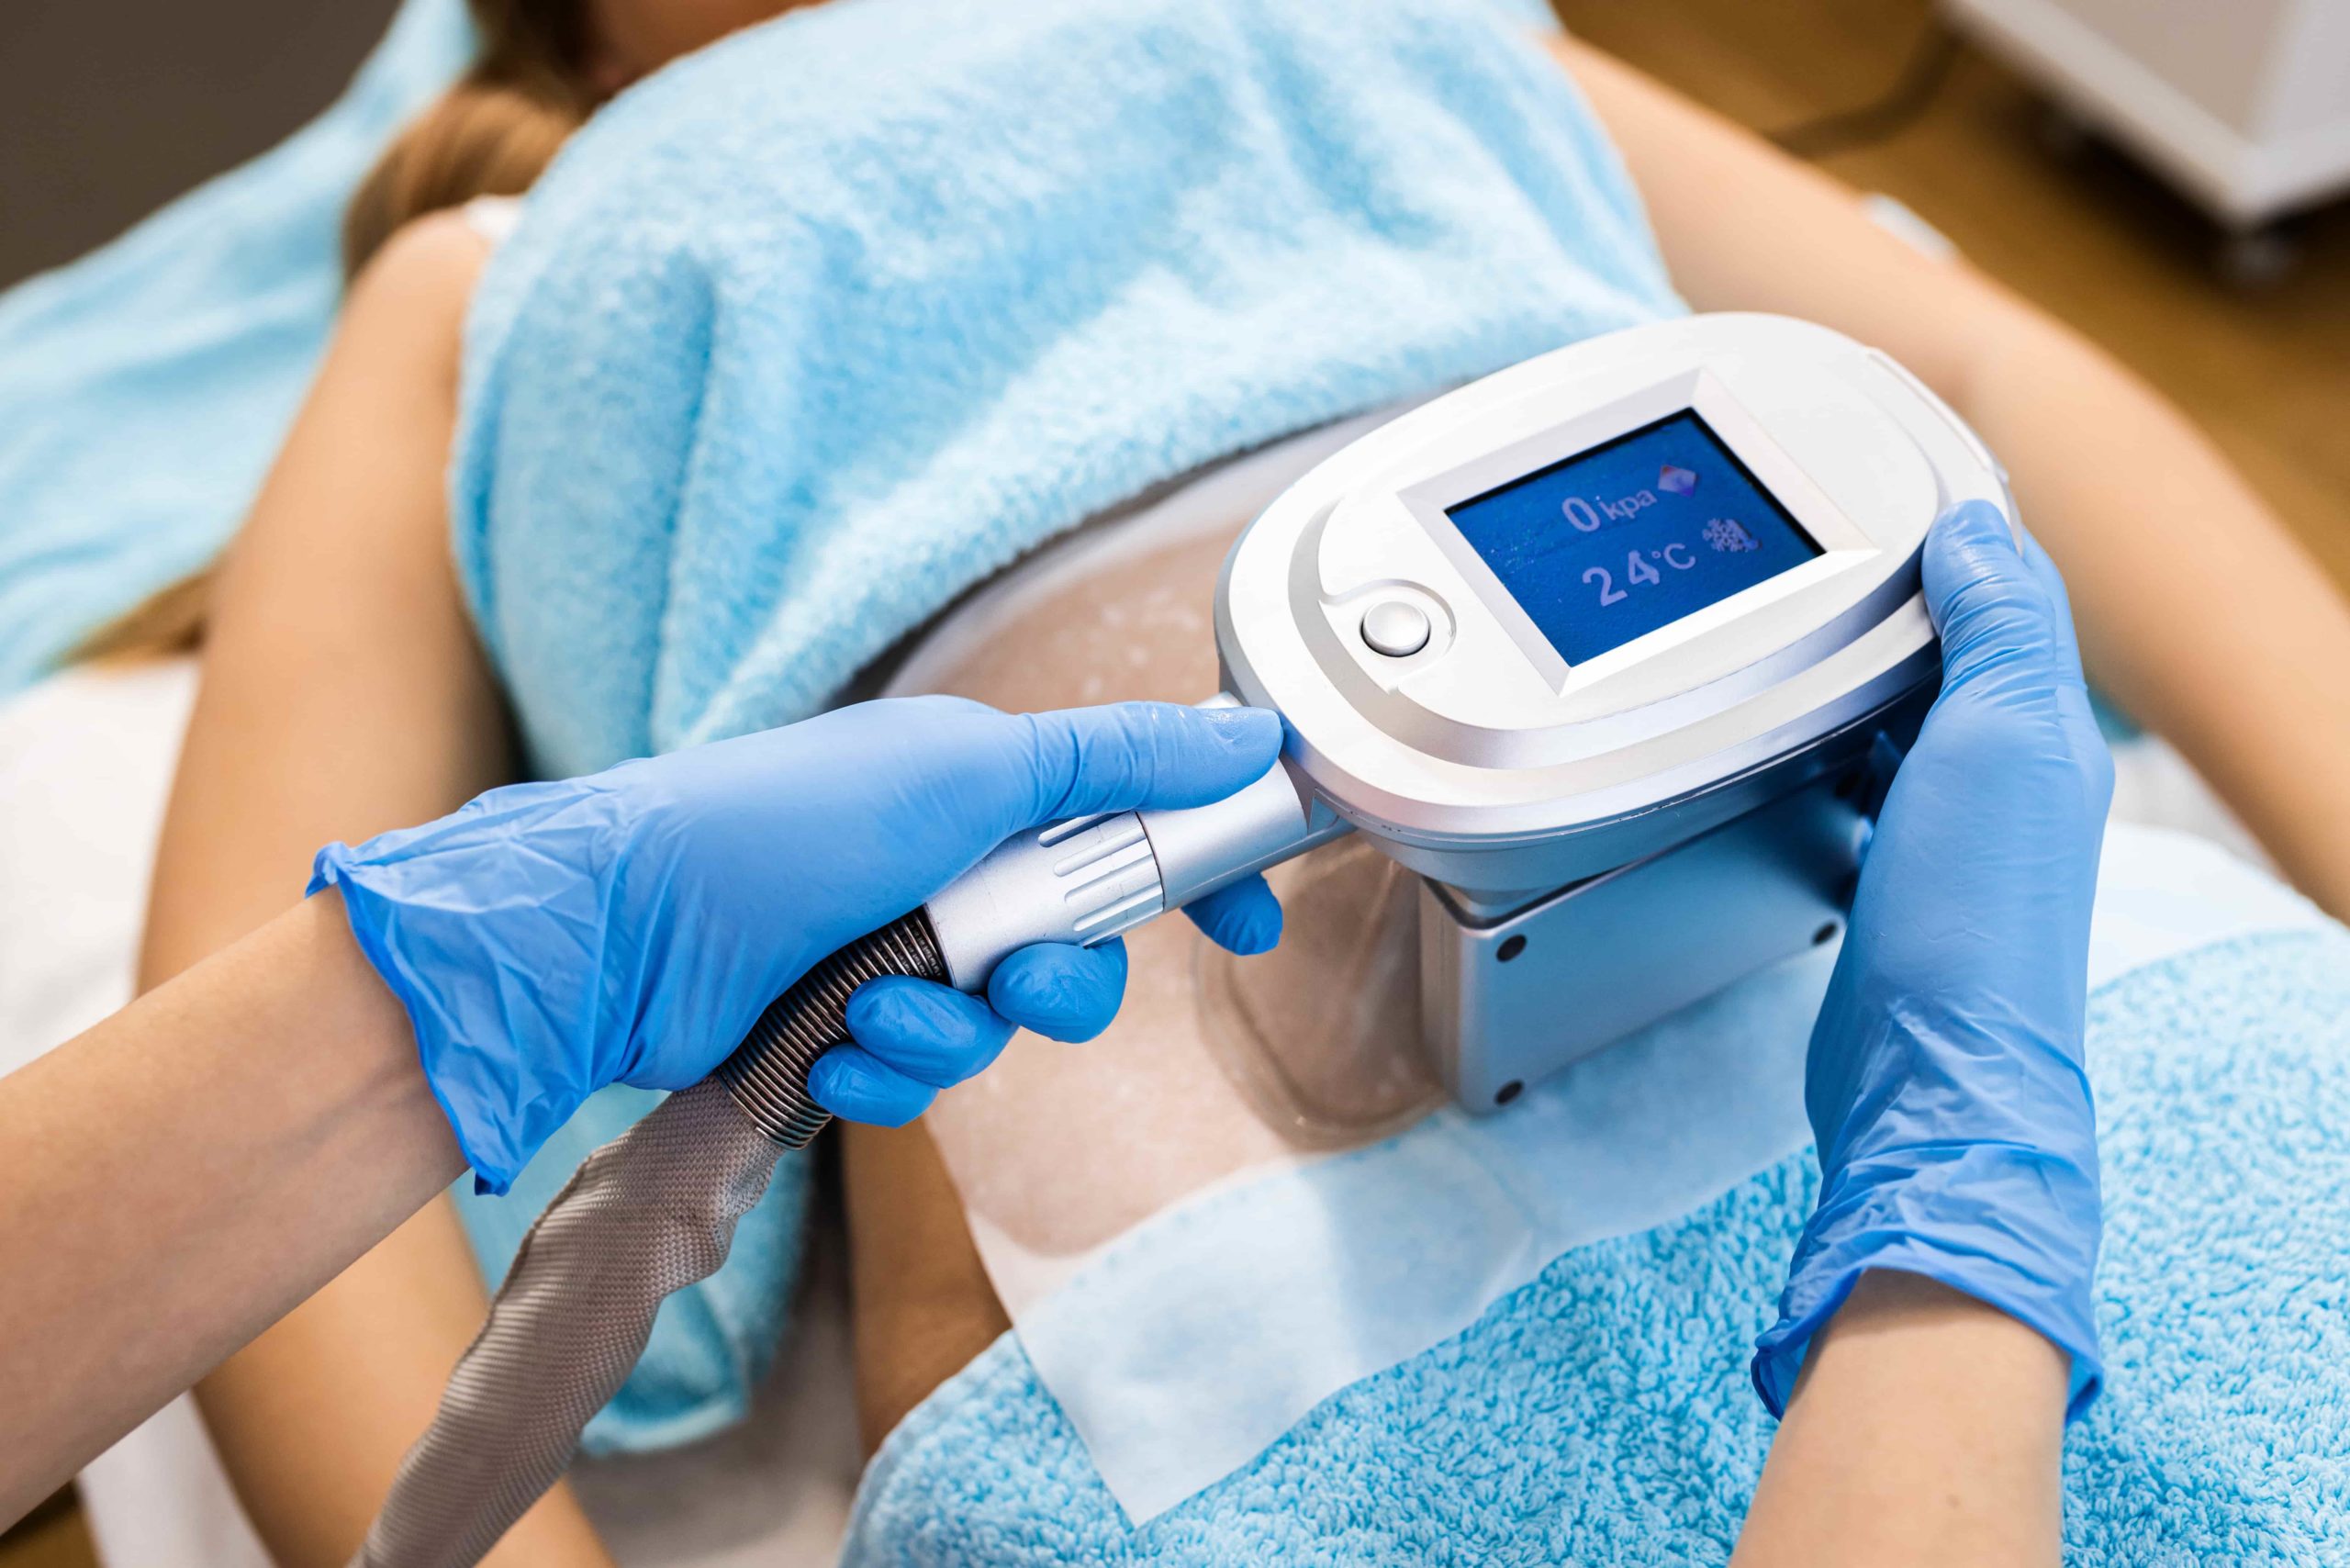 The benefits of CoolSculpting over other non-surgical fat reduction treatments